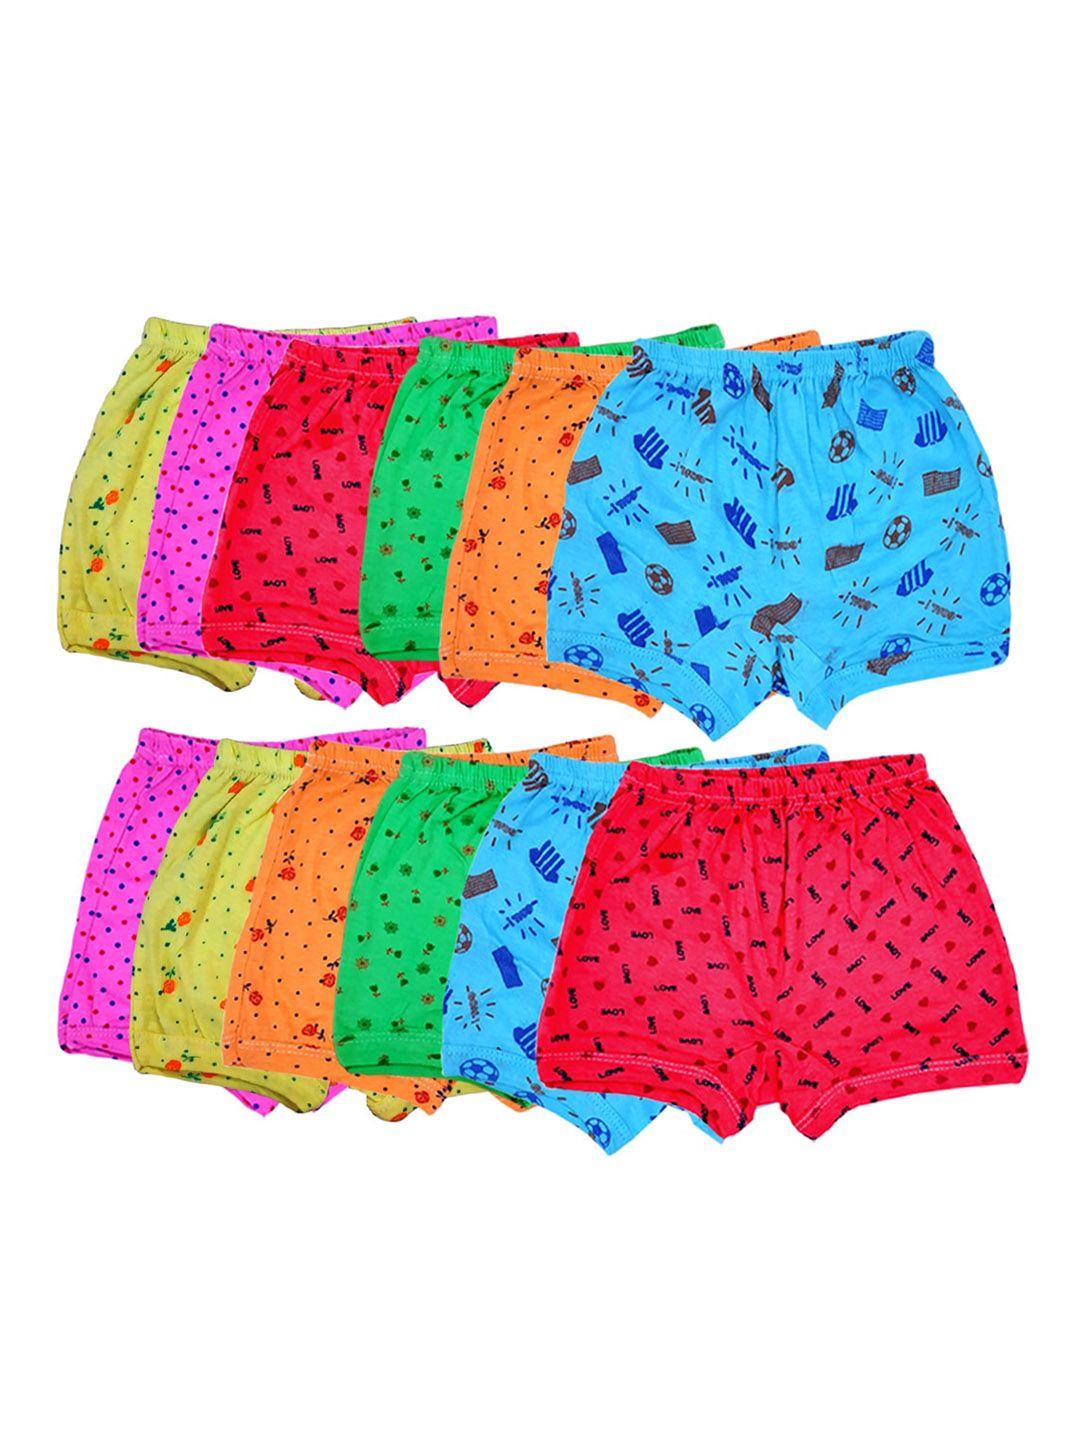 baesd infant kids pack of 12 printed pure cotton basic briefs 29_s.a.o_po-12